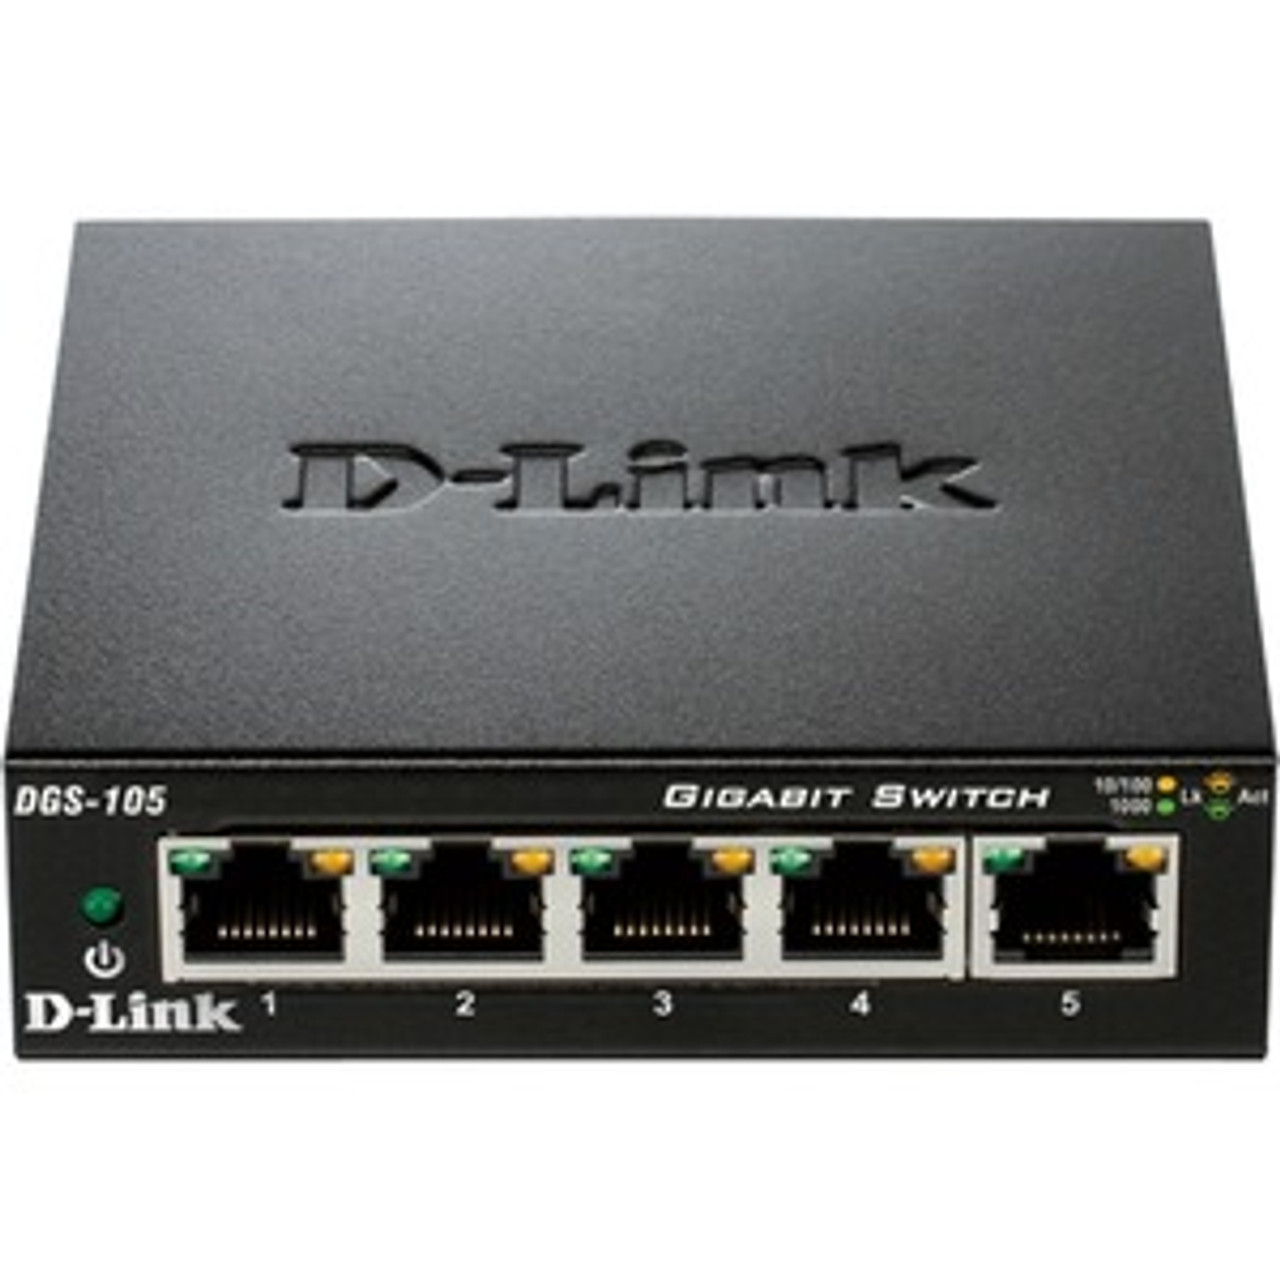 DGS-105GL D-Link DGS-105 Ethernet Switch - 5 Ports - 2 Layer Supported - 3.10 W Power Consumption - Twisted Pair -  (Refurbished)